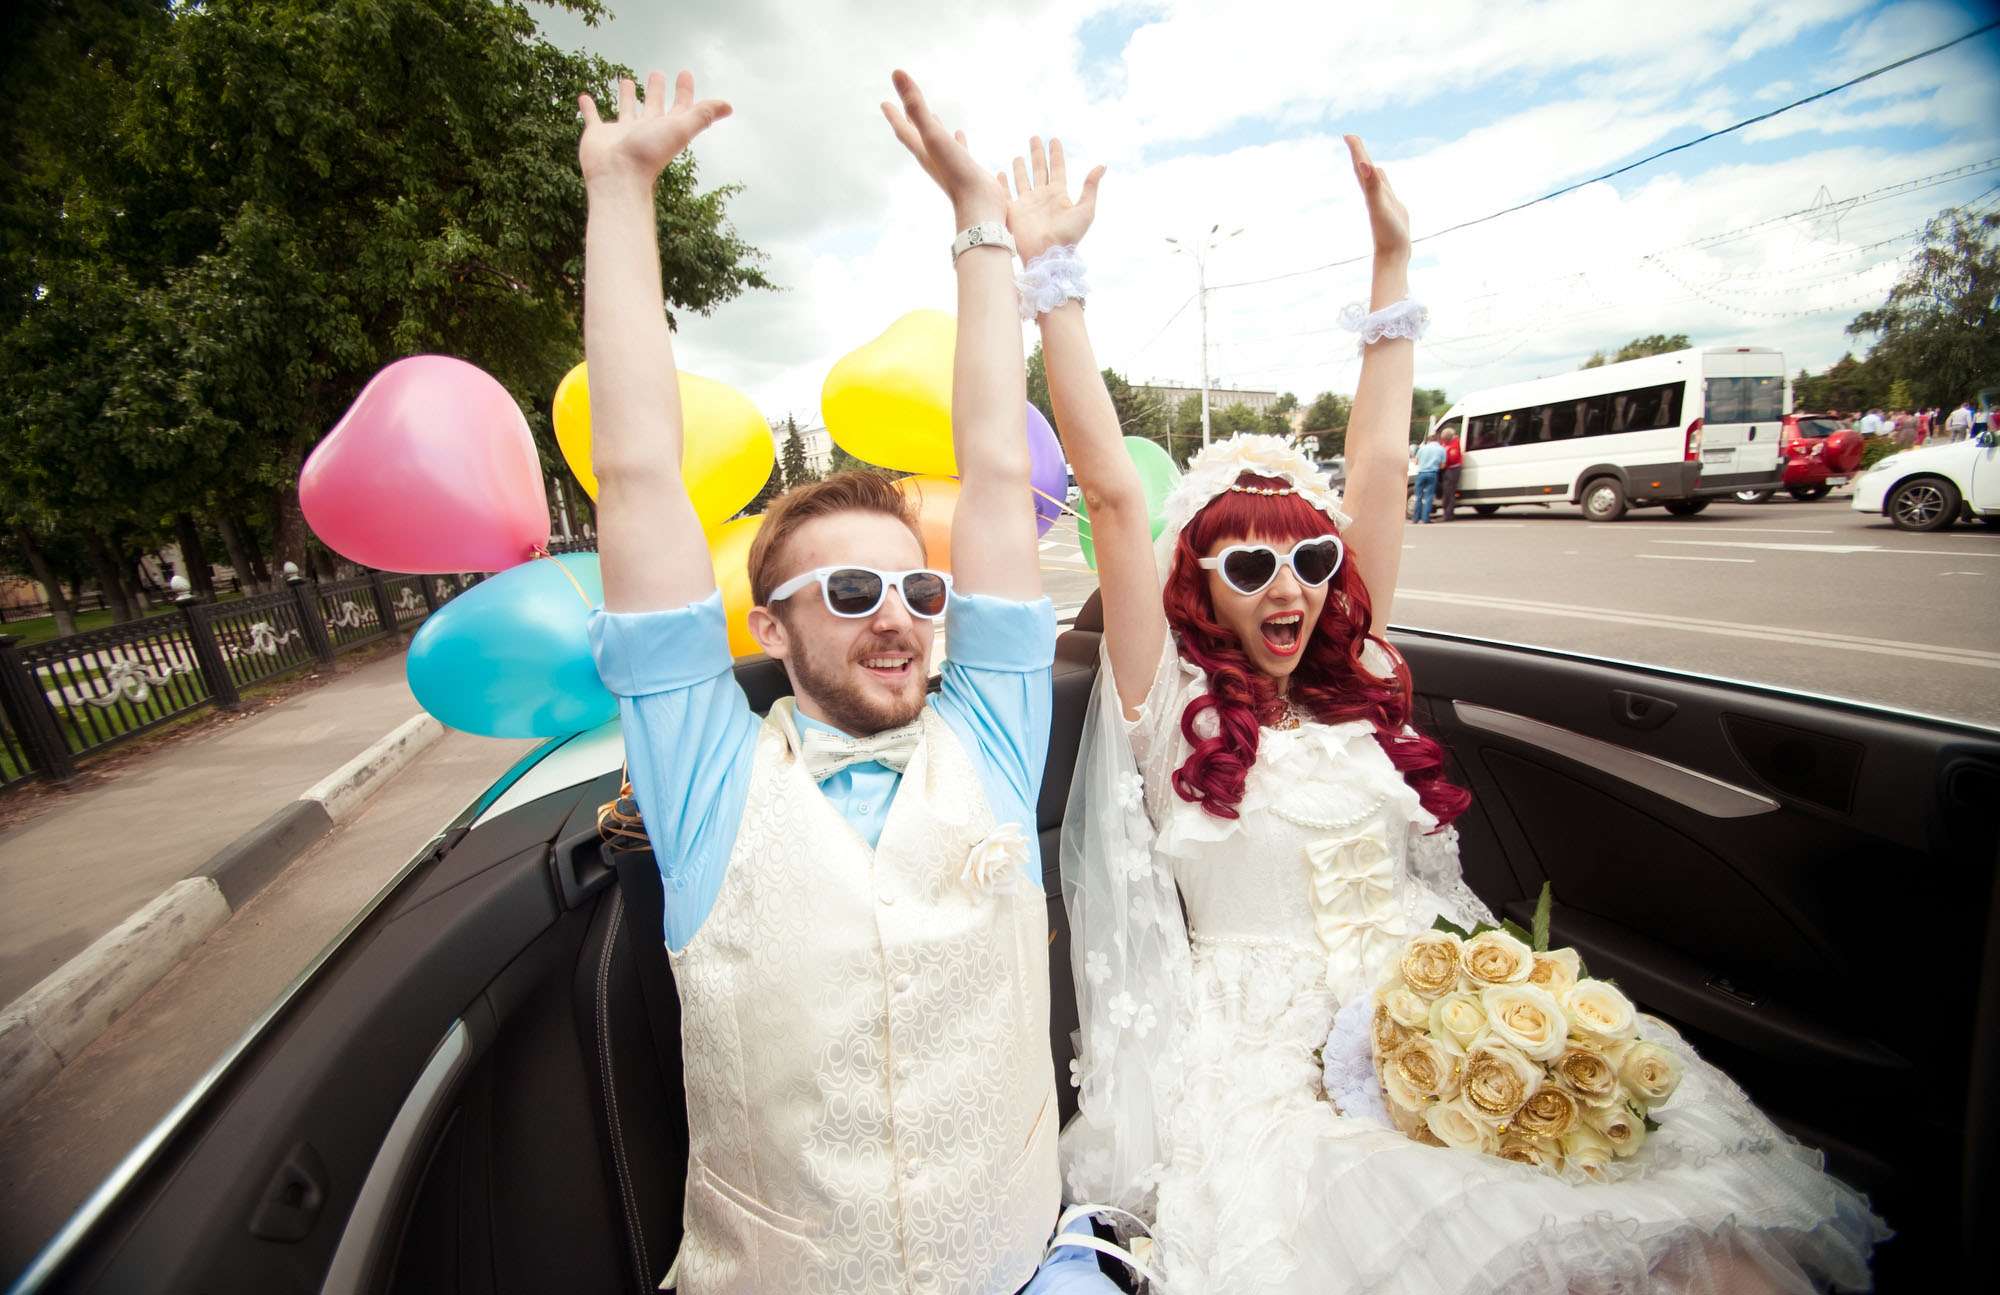 Anime  1950s inspired Wedding in Russia  Rock n Roll Bride